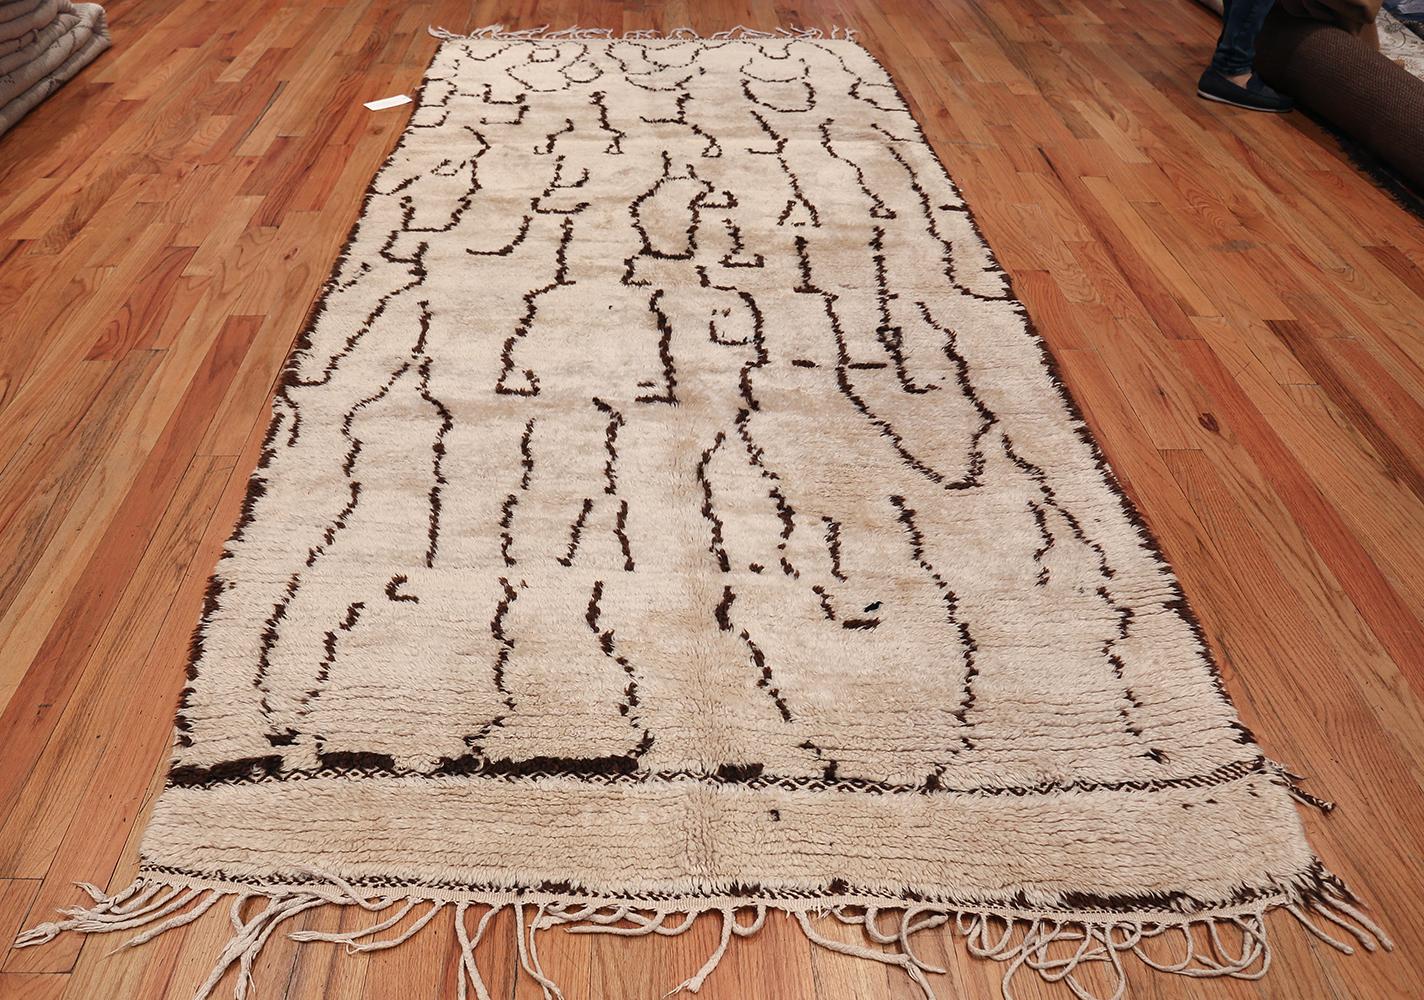 Magnificent And Primitive Brown Cream Vintage Shag Moroccan Beni Ourain Rug, Country of Origin / Rug Type: Morocco, Circa Date: Mid – 20th Century. Size: 5 ft x 10 ft 9 in (1.52 m x 3.28 m)

The neutral cream background and earthy brown toned